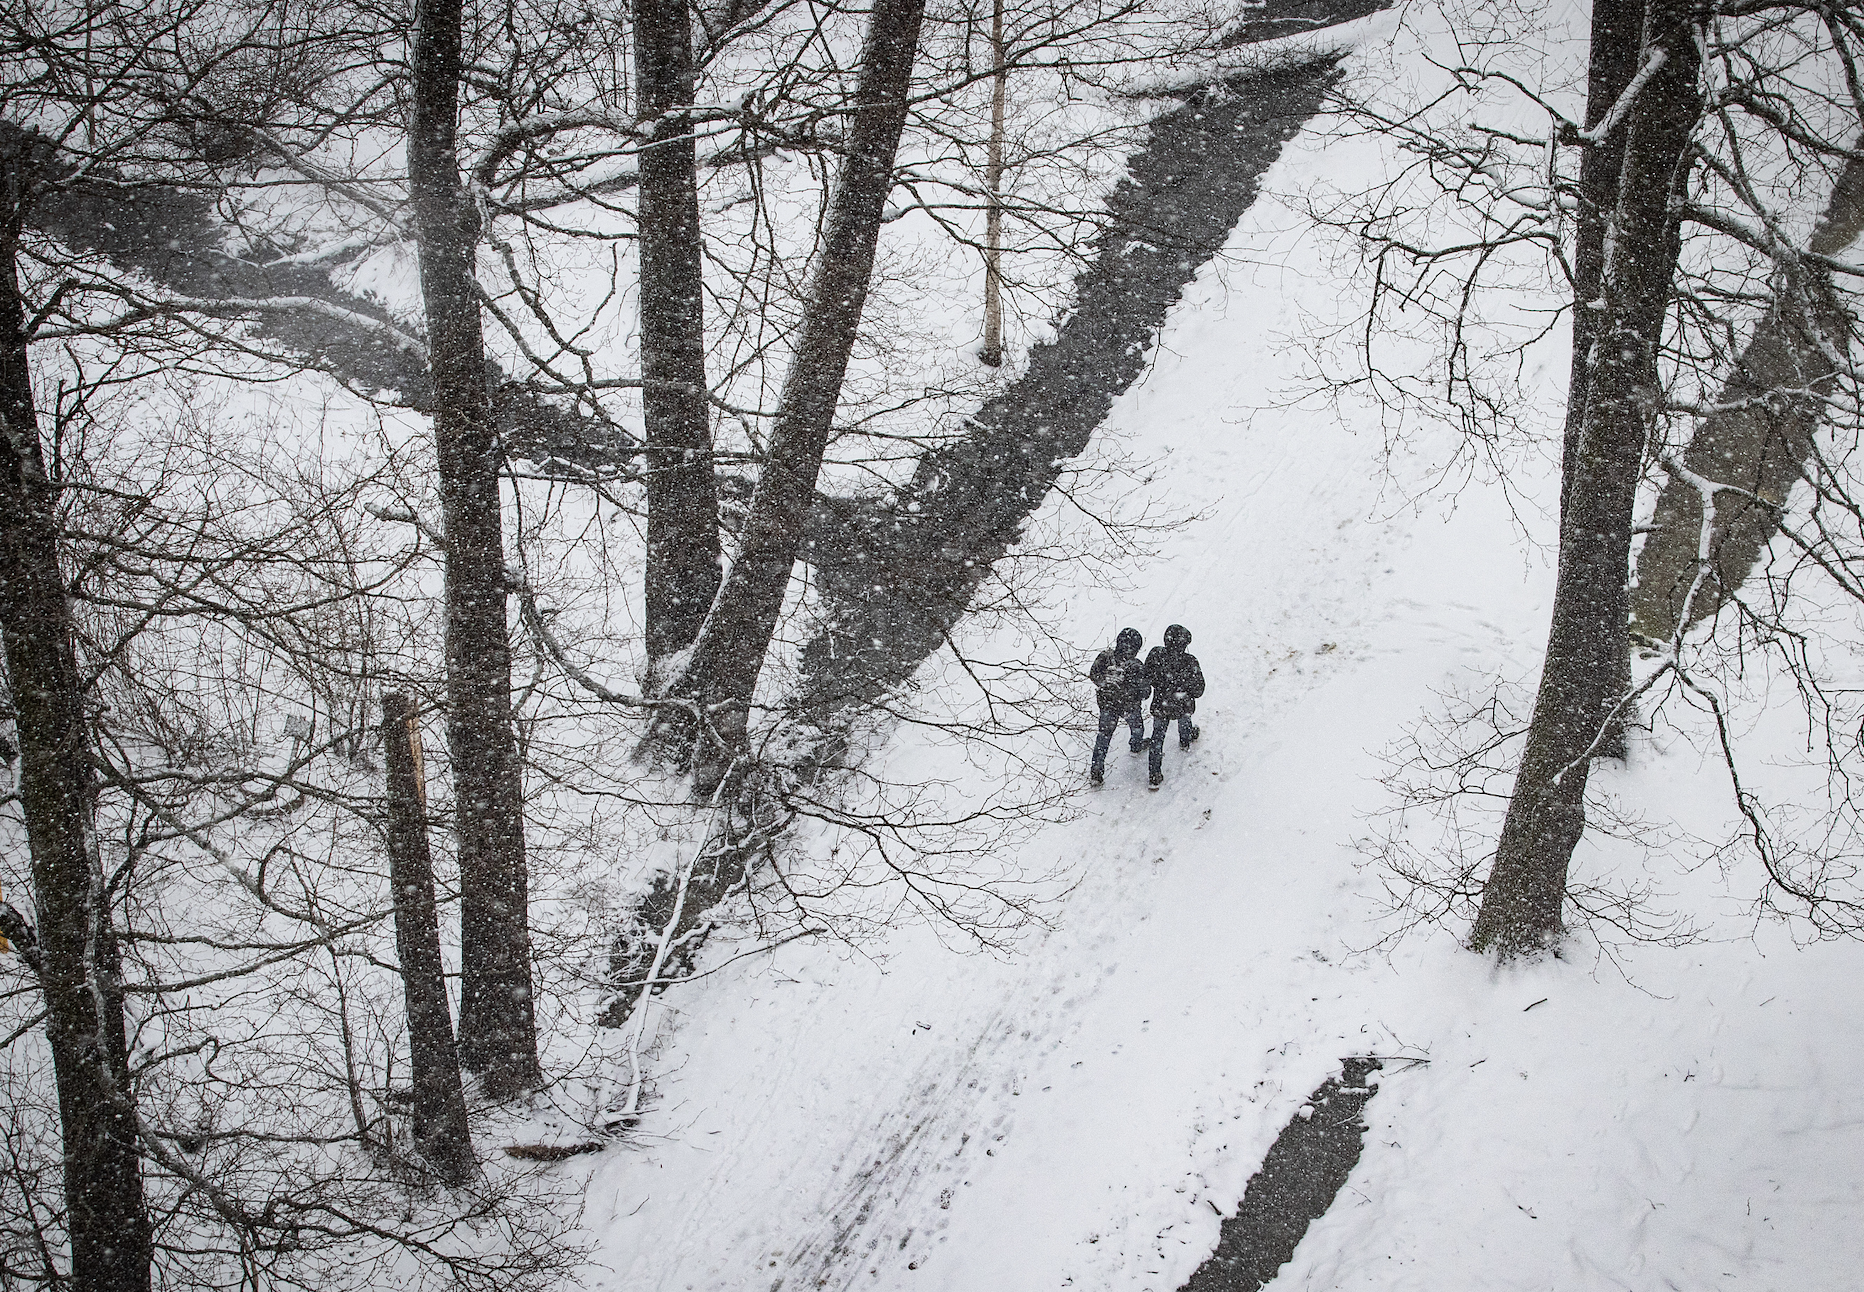 Two people walking on a snow-covered path among trees